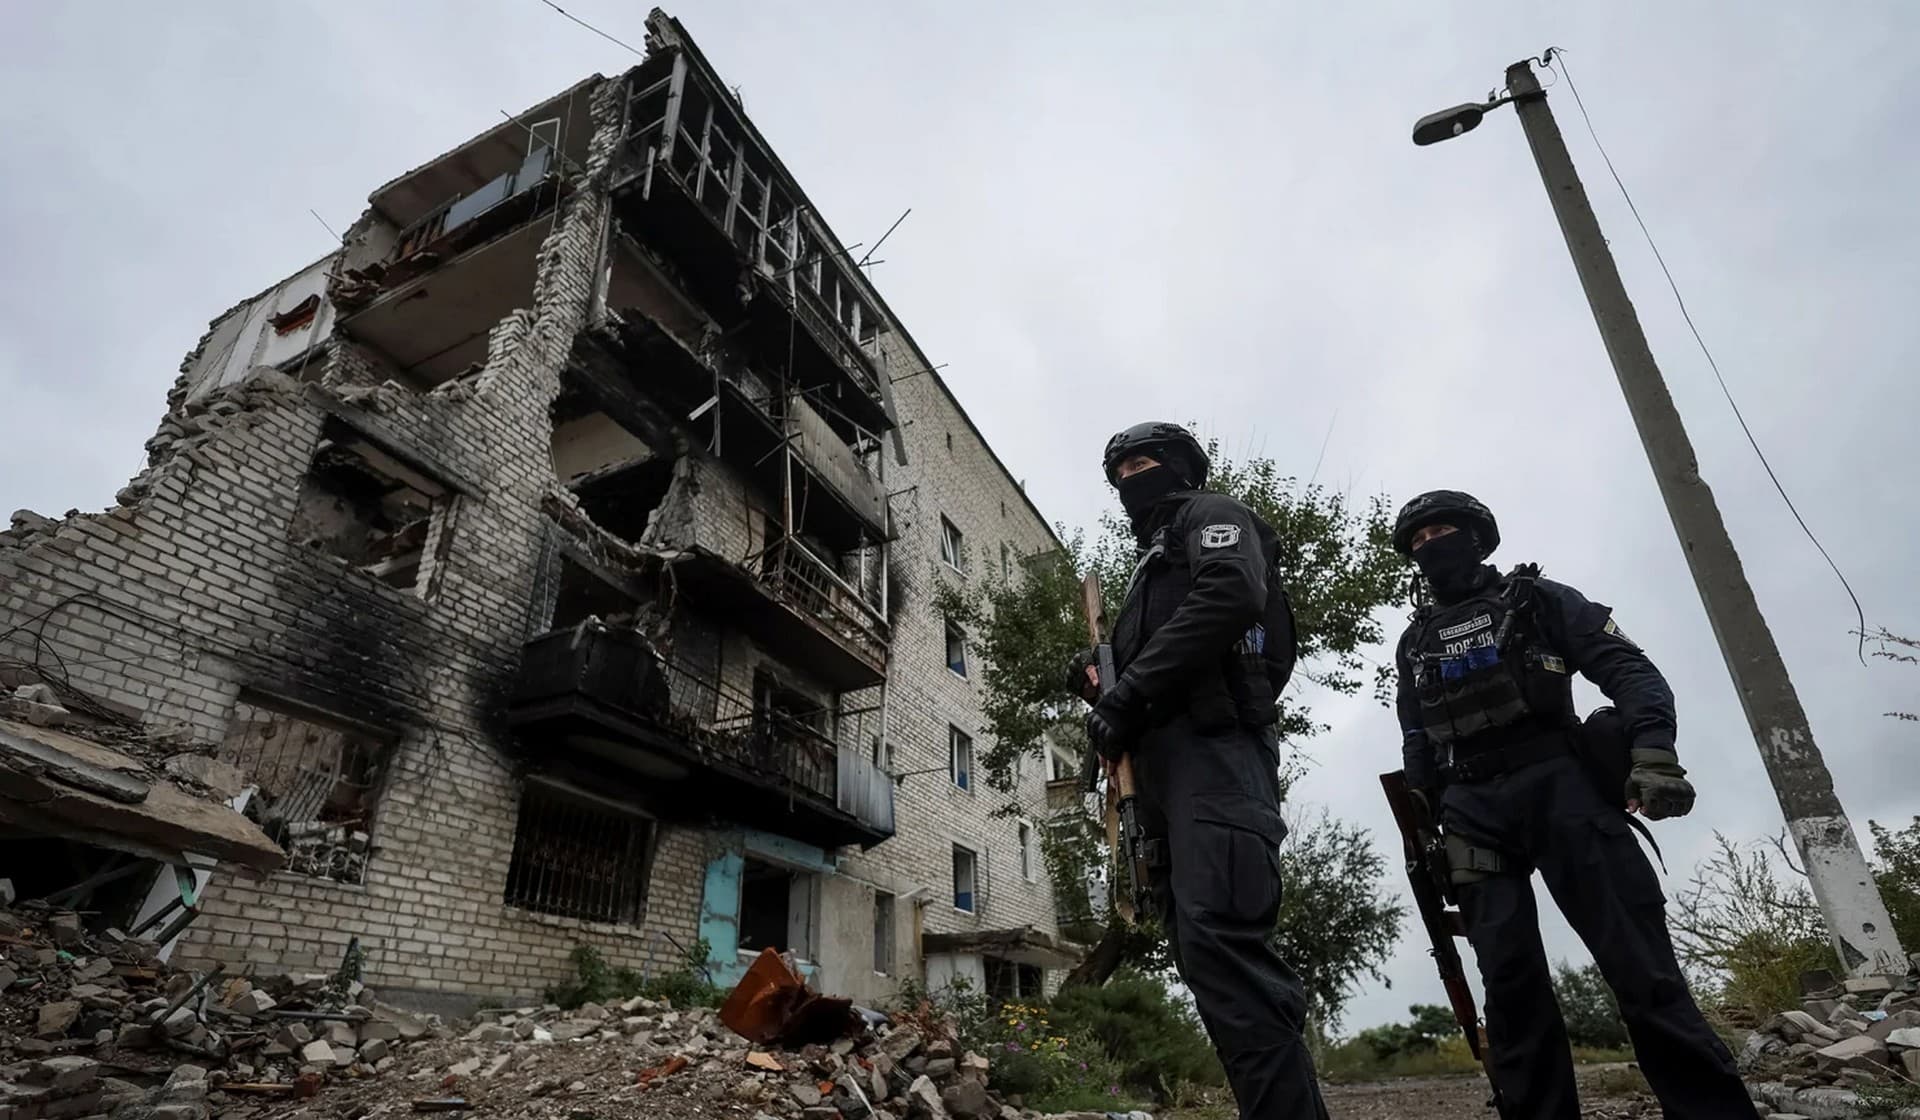 Ukrainian police patrol an area in the town of Izium